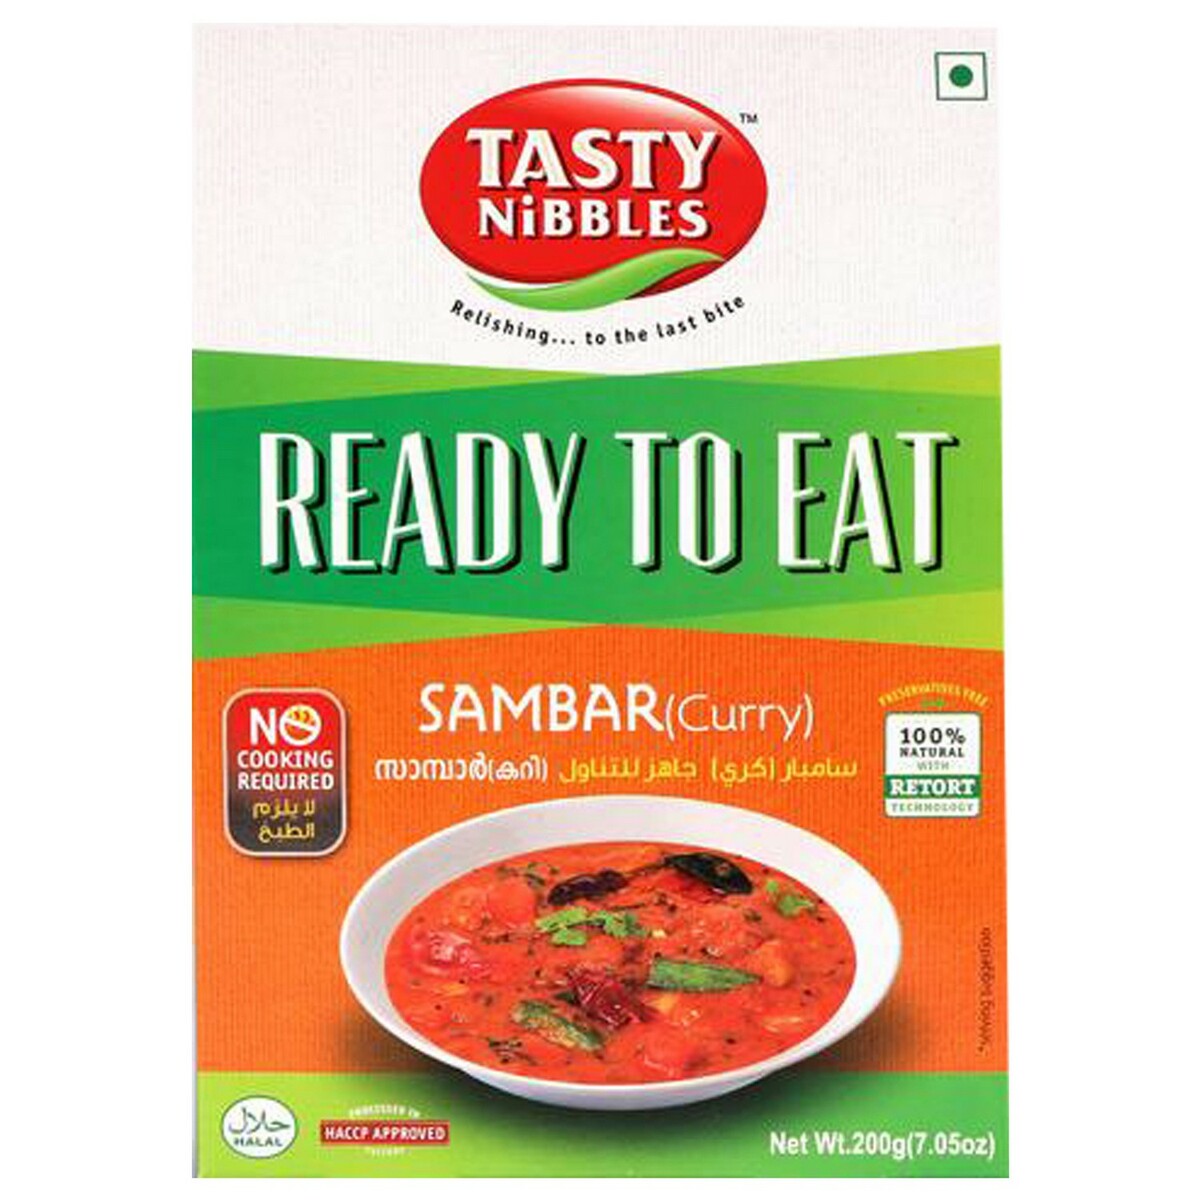 Tasty Nibbles Ready To Eat Sambar In Pouch